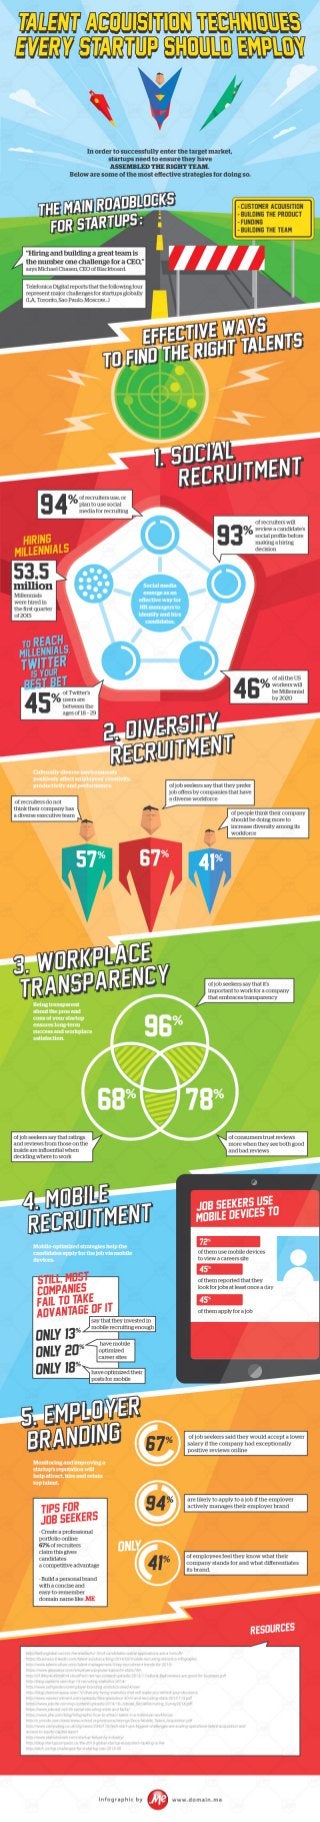 [INFOGRAPHIC] Talent Acquisition Techniques Every Startup Should Employ